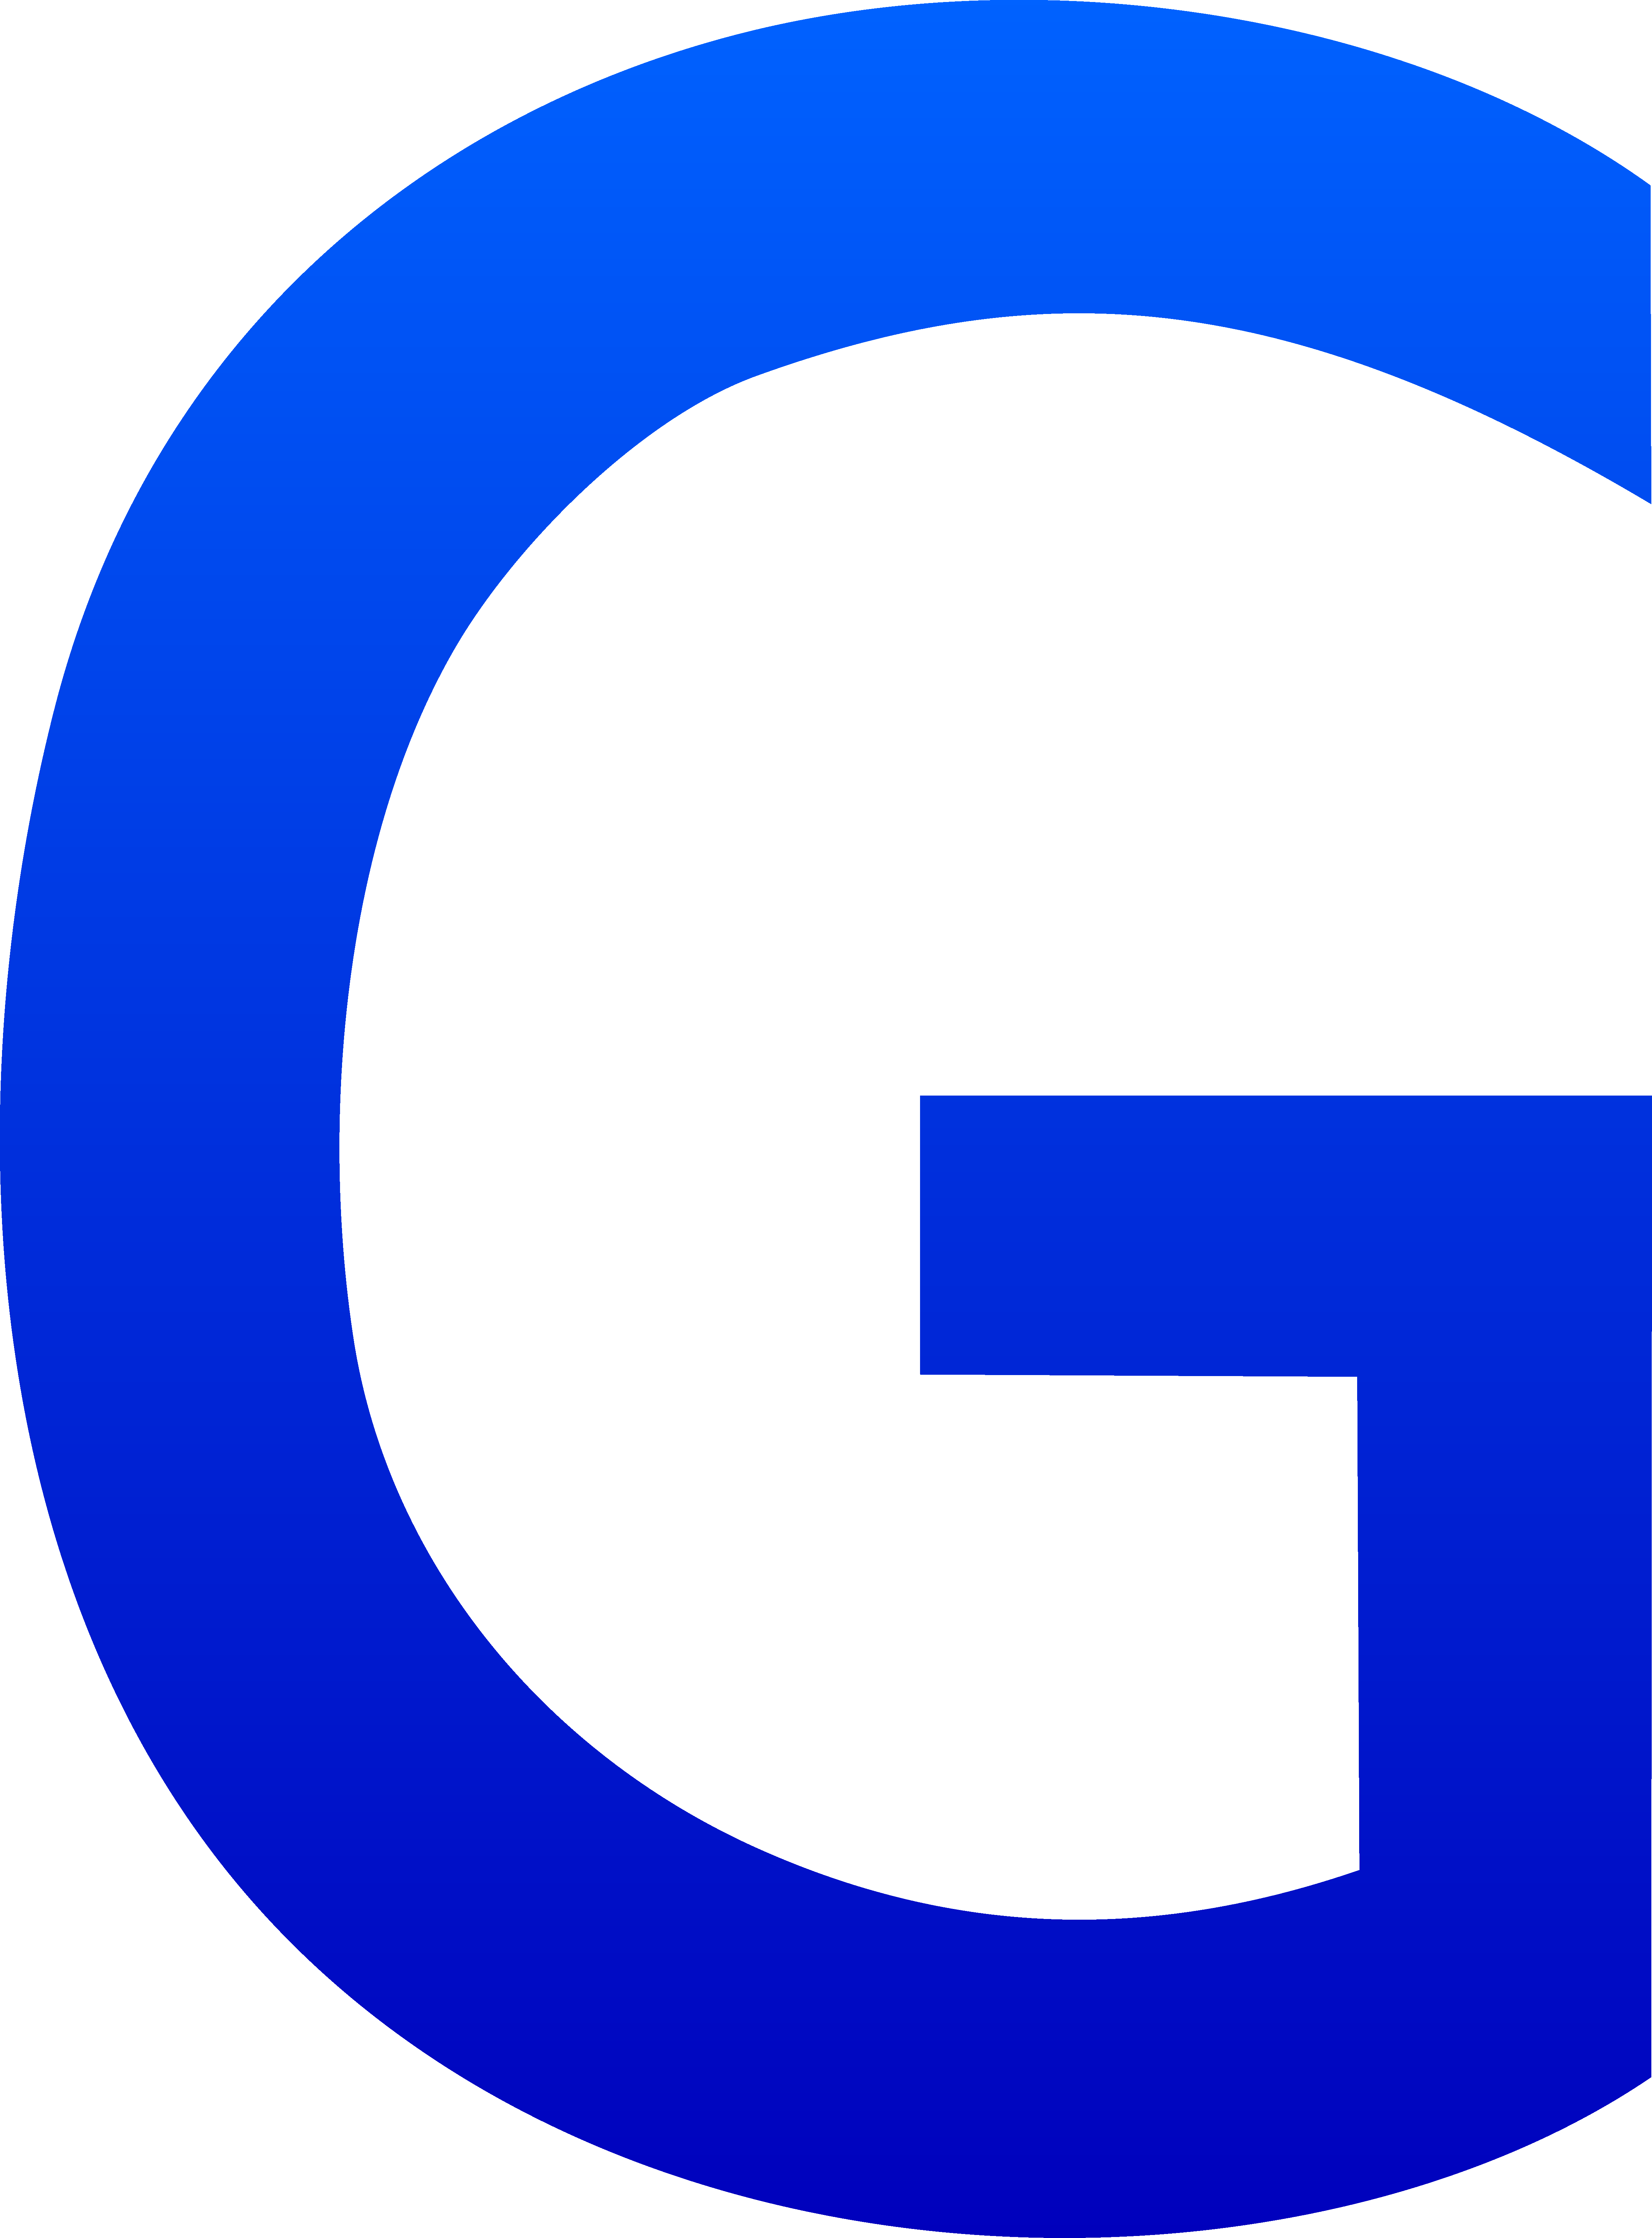 The Letter G - Clipart Of Letter G (4936x6686)